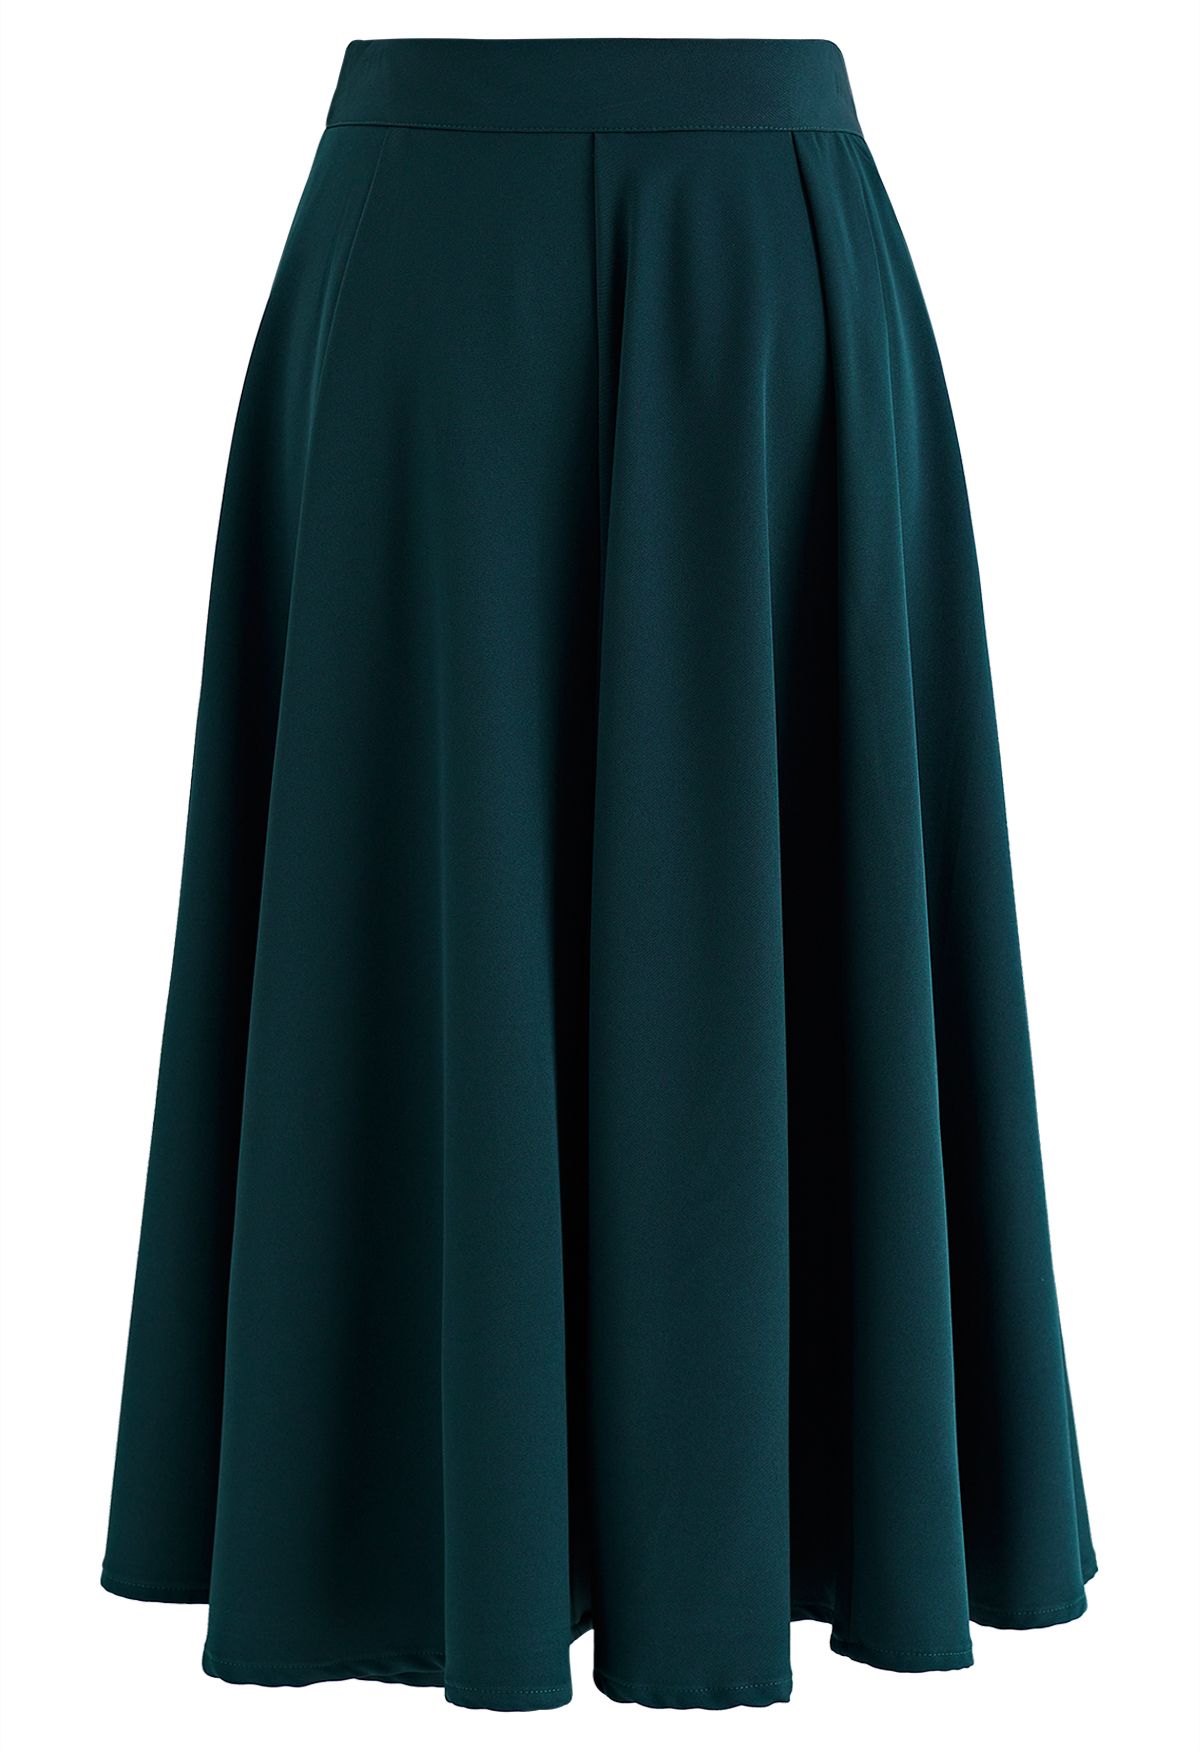 Buttoned Pleated A-Line Skirt in Dark Green